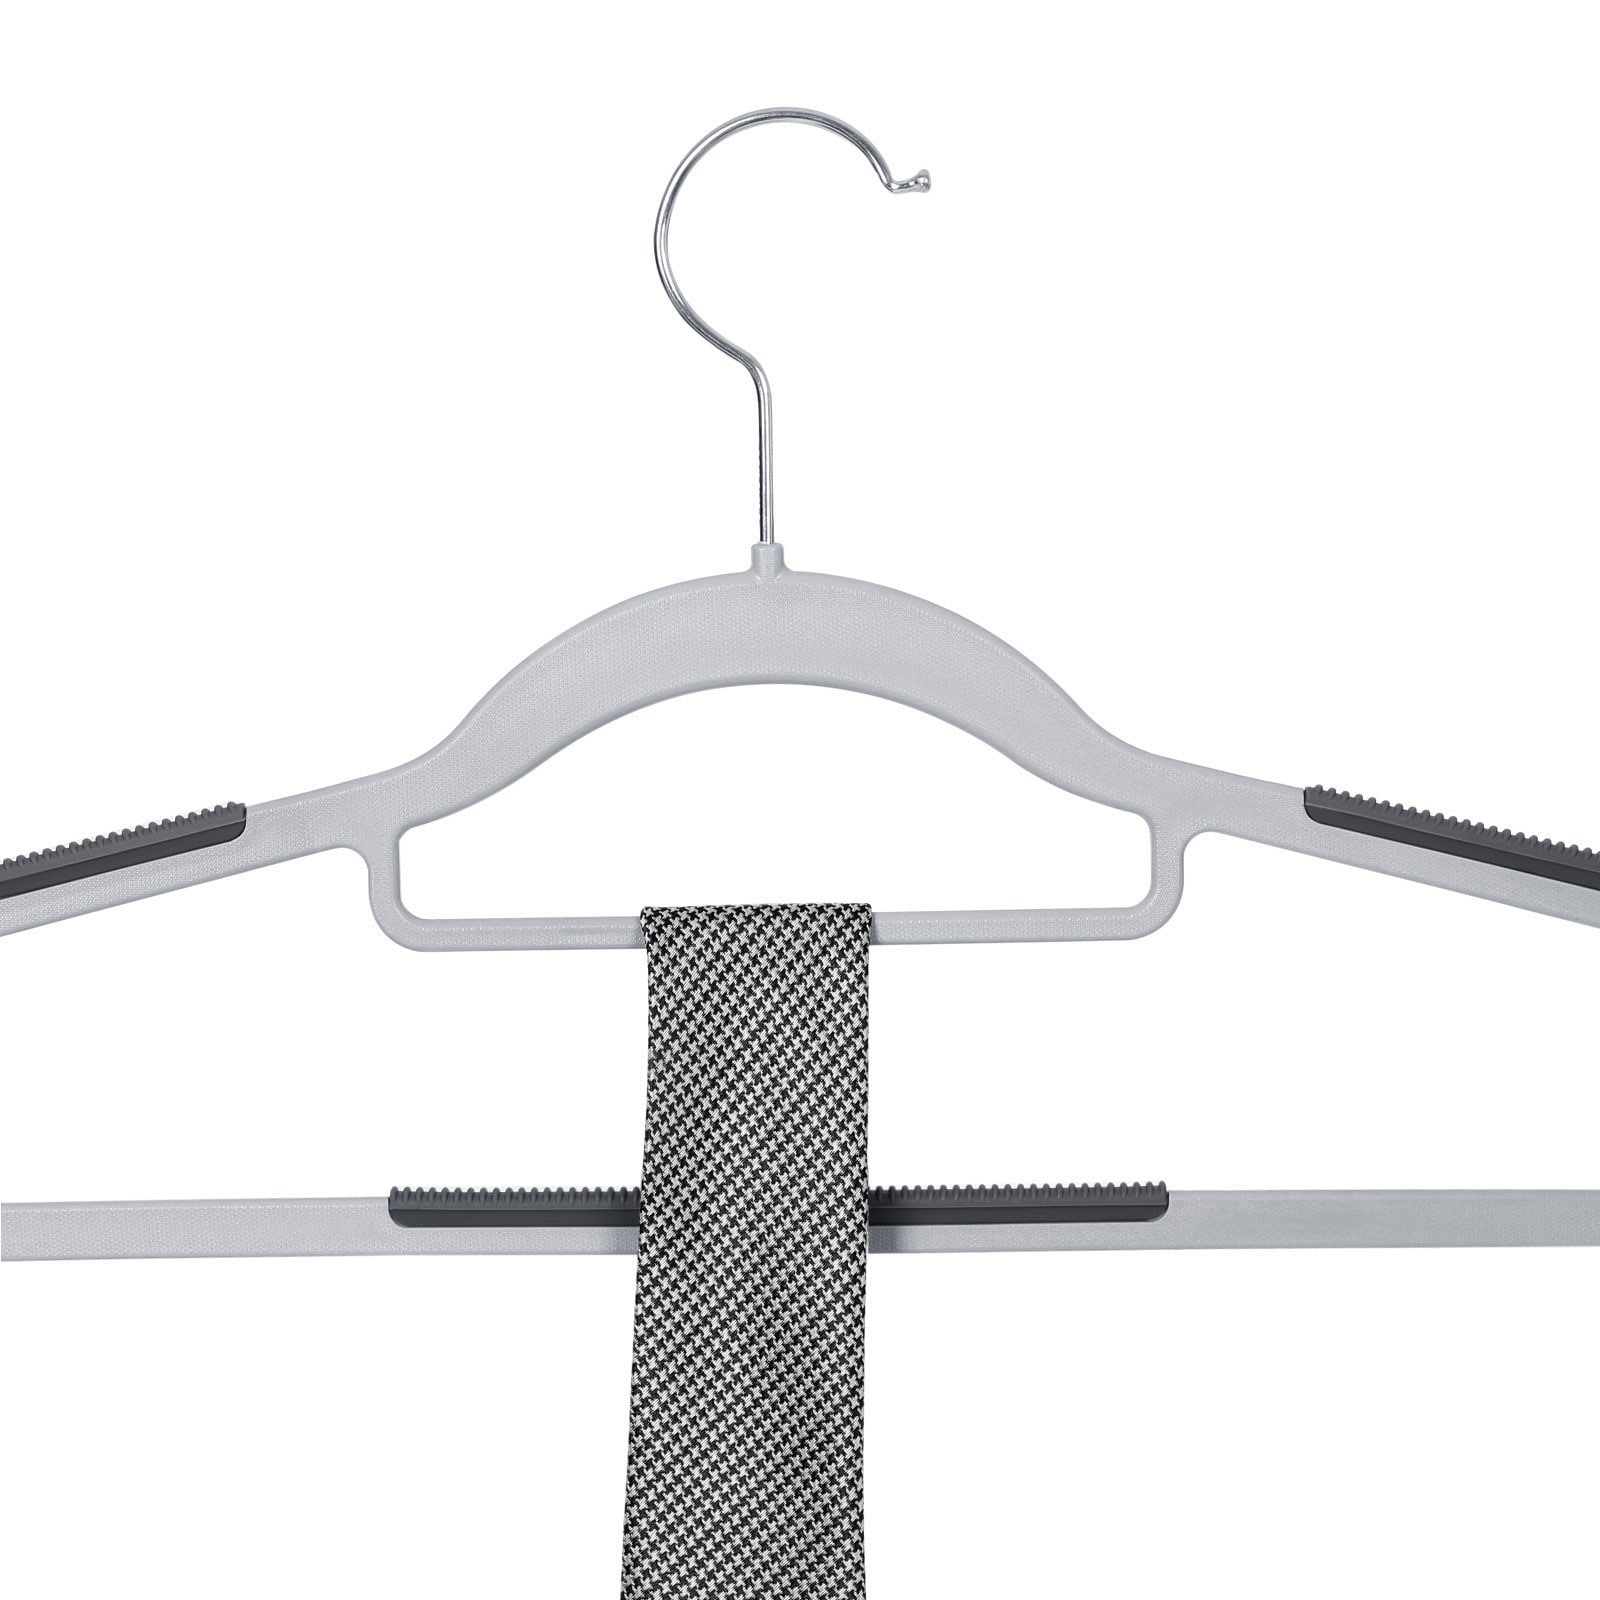 https://ak1.ostkcdn.com/images/products/is/images/direct/84bc0aba3de9b9023a18ac981fa4783e7c68e6fe/SONGMICS-Pack-of-50-Coat-Hangers%2C-Heavy-Duty-Plastic-Hangers-with-Non-Slip-Design%2C-Space-Saving-Clothes-Hangers.jpg